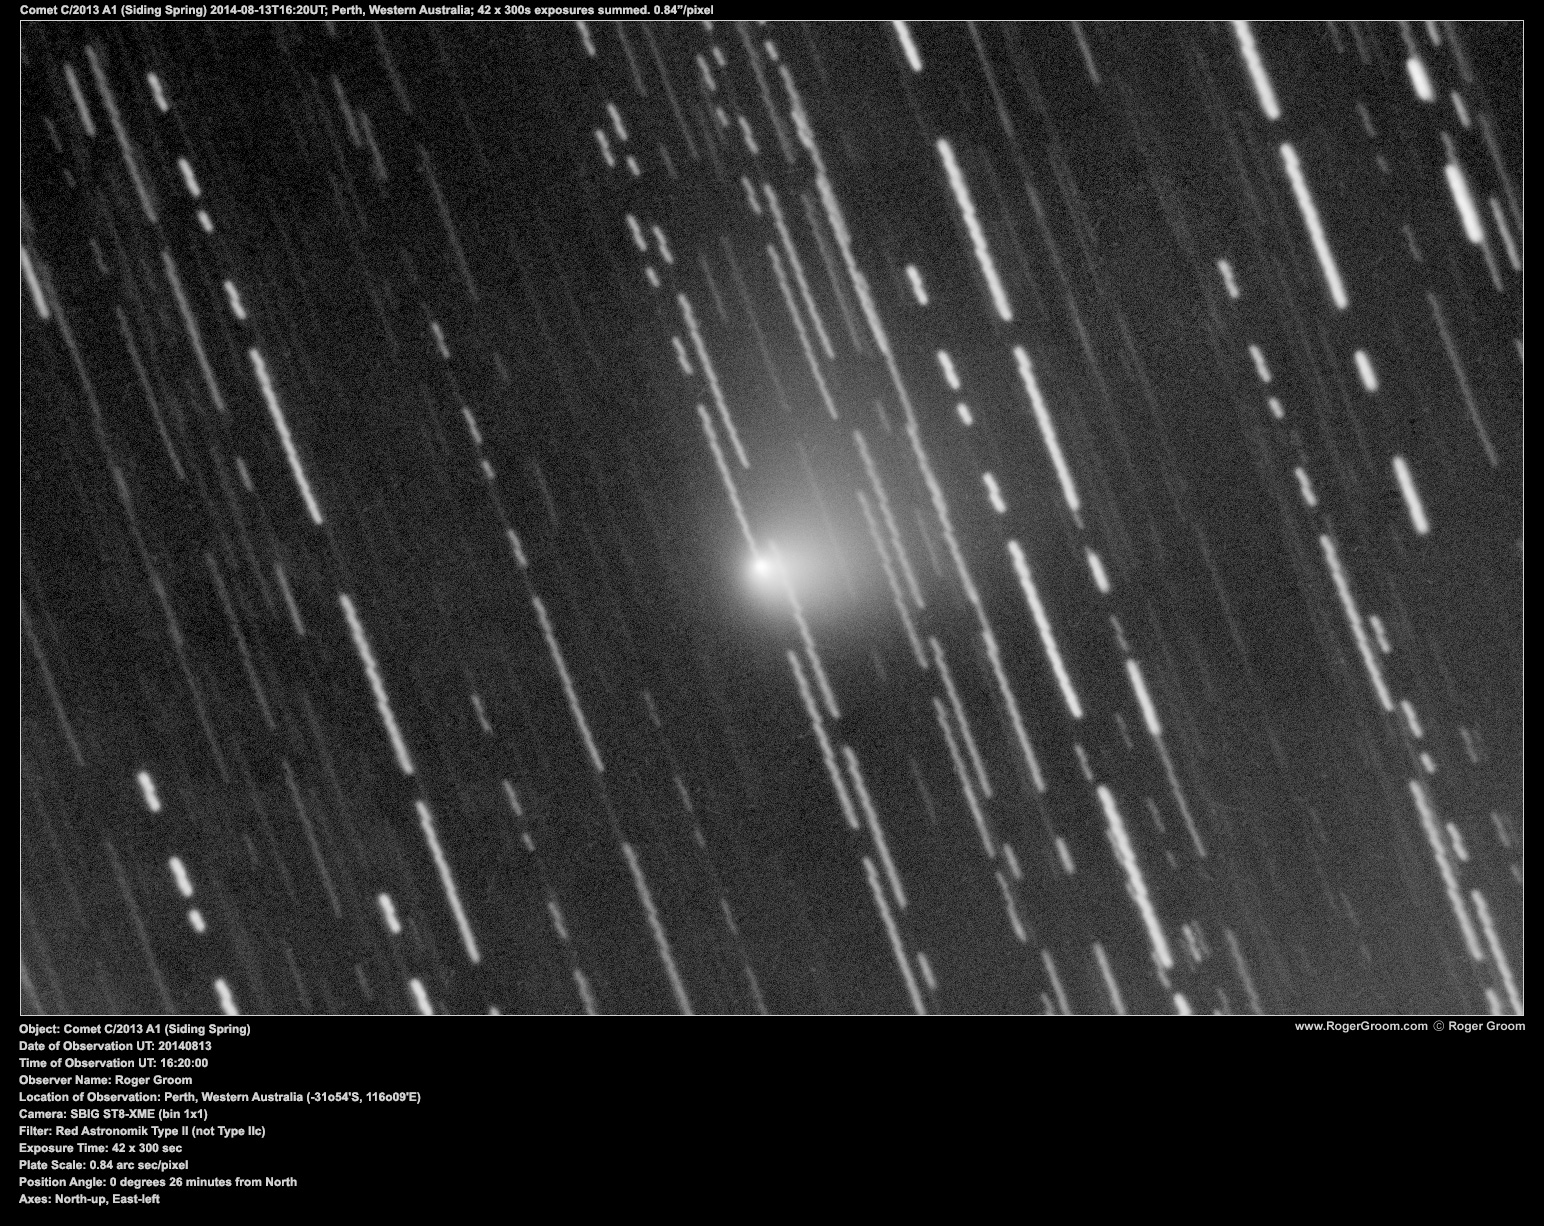 Object: Comet C/2013 A1 (Siding Spring) Date of Observation UT: 20140813 Time of Observation UT: 16:20:00 Observer Name: Roger Groom Location of Observation: Perth, Western Australia (-31o54'S, 116o09'E) Camera: SBIG ST8-XME (bin 1x1) Filter: Red Astronomik Type II (not Type IIc) Exposure Time: 10 x 300 sec Plate Scale: 0.84 arc sec/pixel Position Angle: 0 degrees 26 minutes from North Axes: North-up, East-left